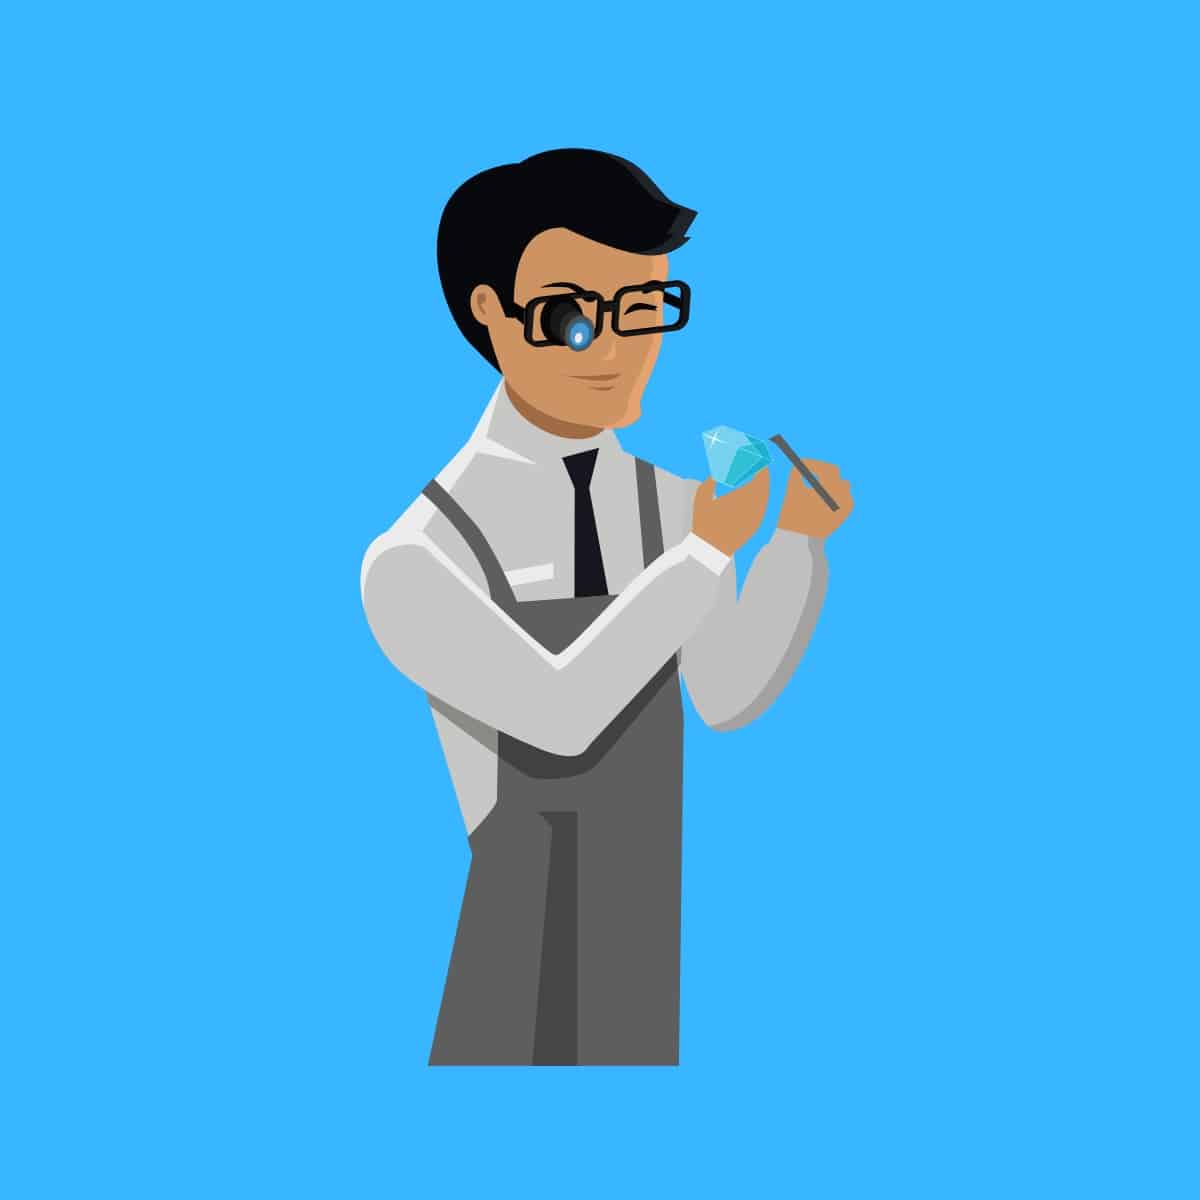 Cartoon graphic of a jeweler inspecting a diamond on a blue background.